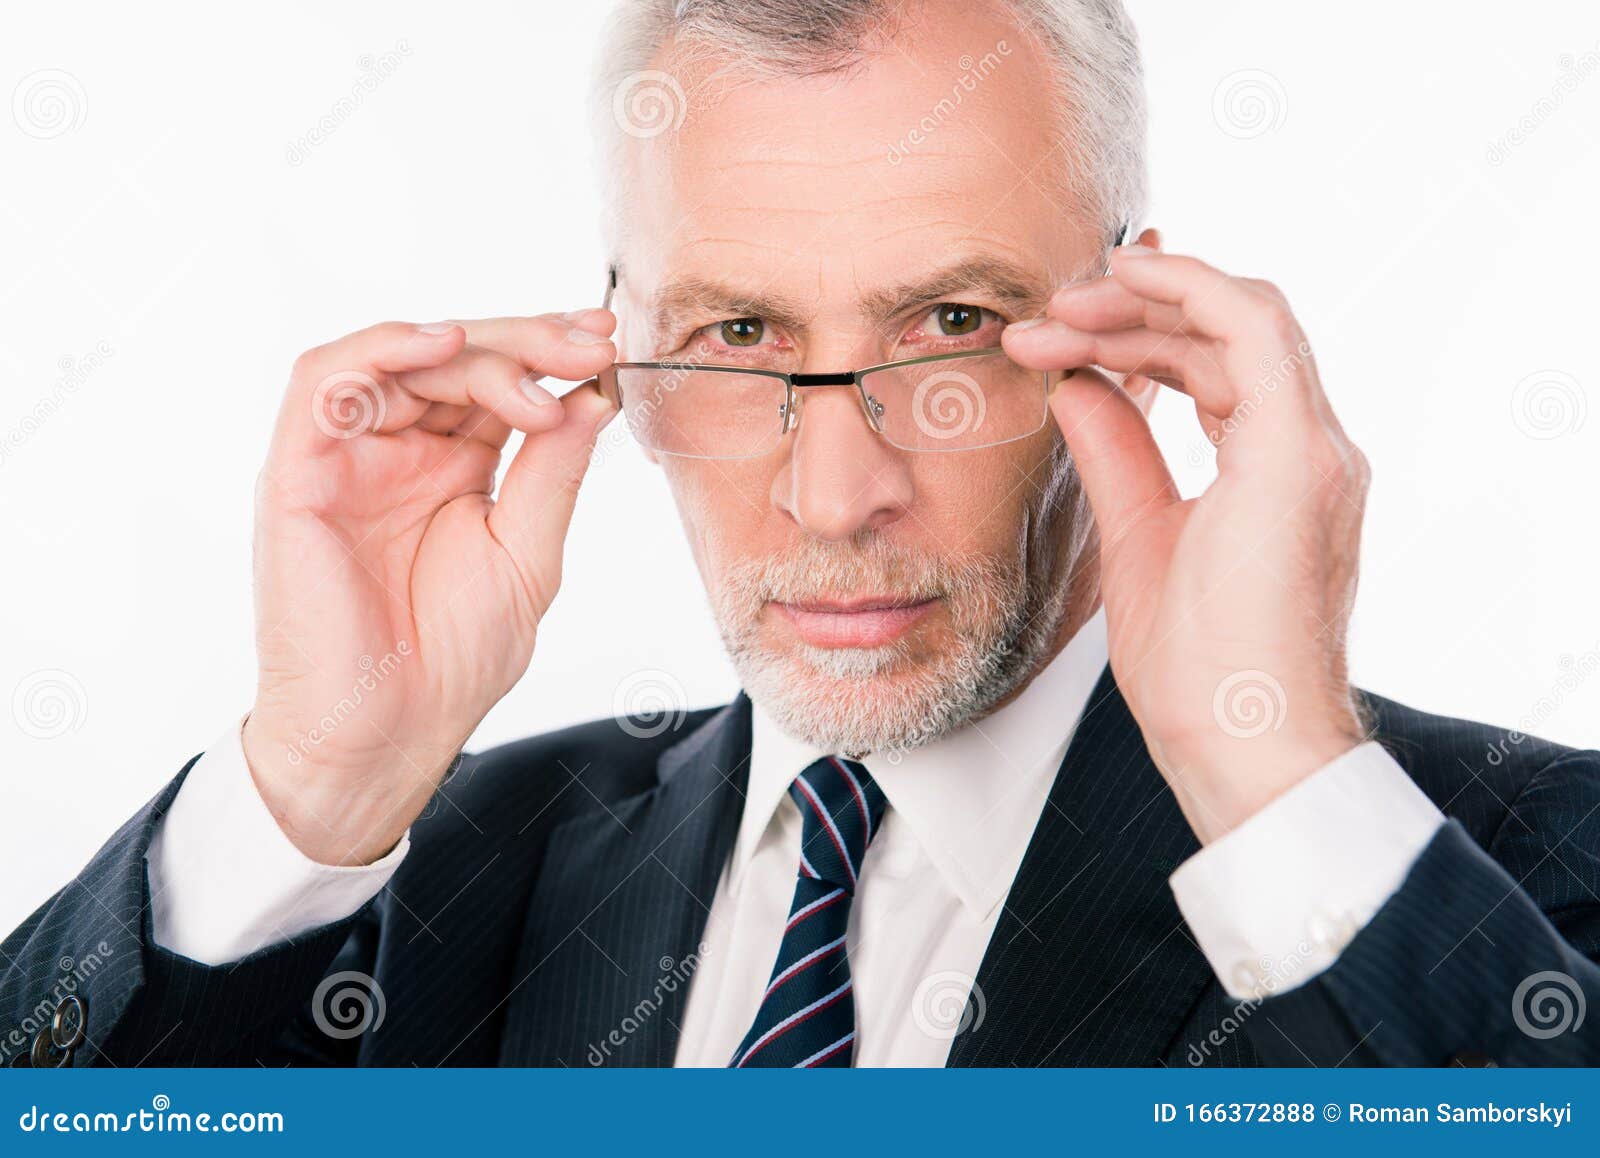 Handsome Intelligent Old Man in Business Suit Holding Glasses Stock ...